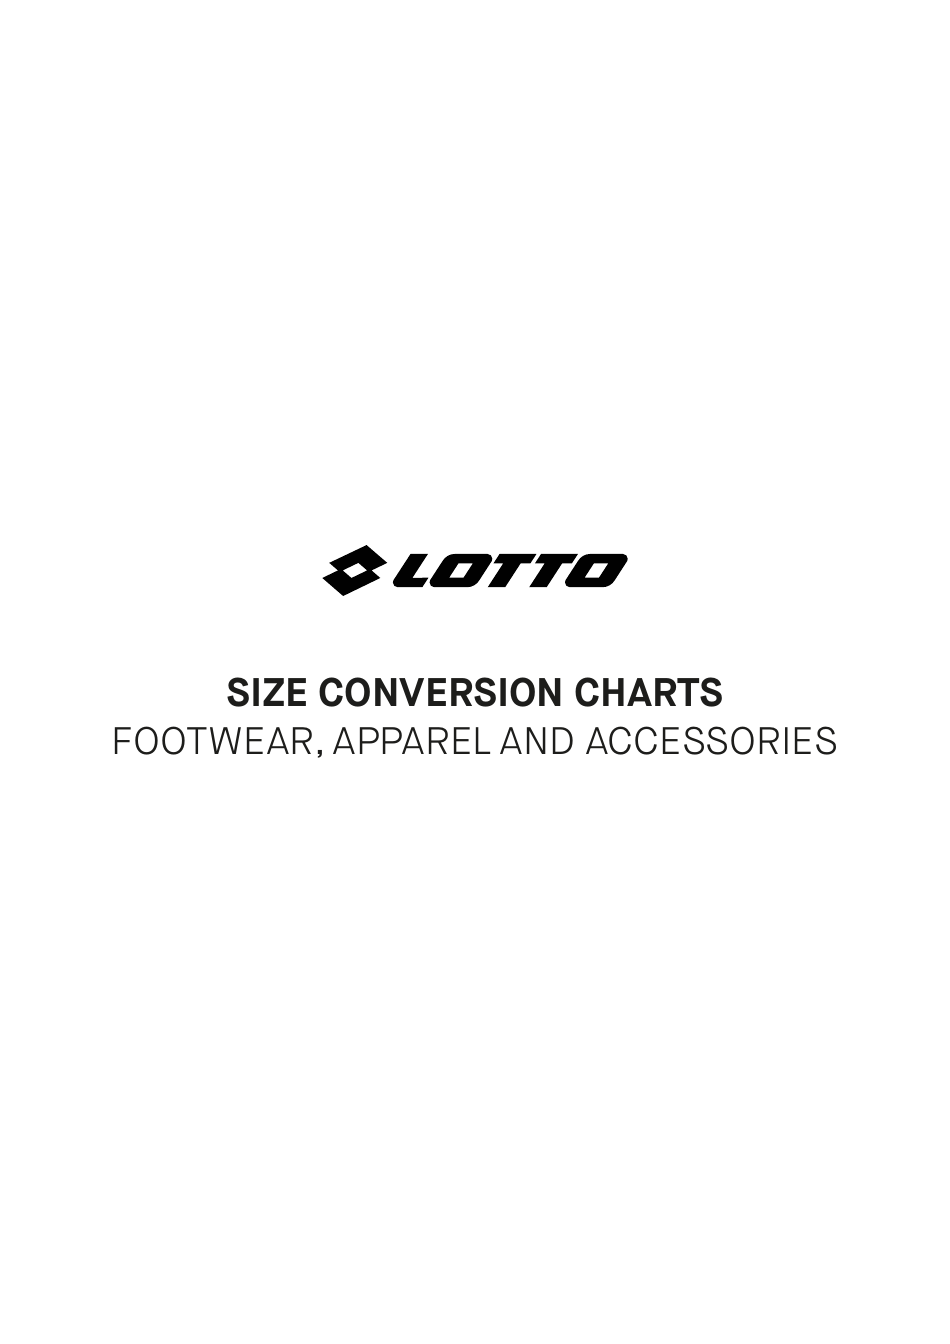 Tennis Footwear, Apparel and Accessories Size Conversion Charts - Lotto, Page 1